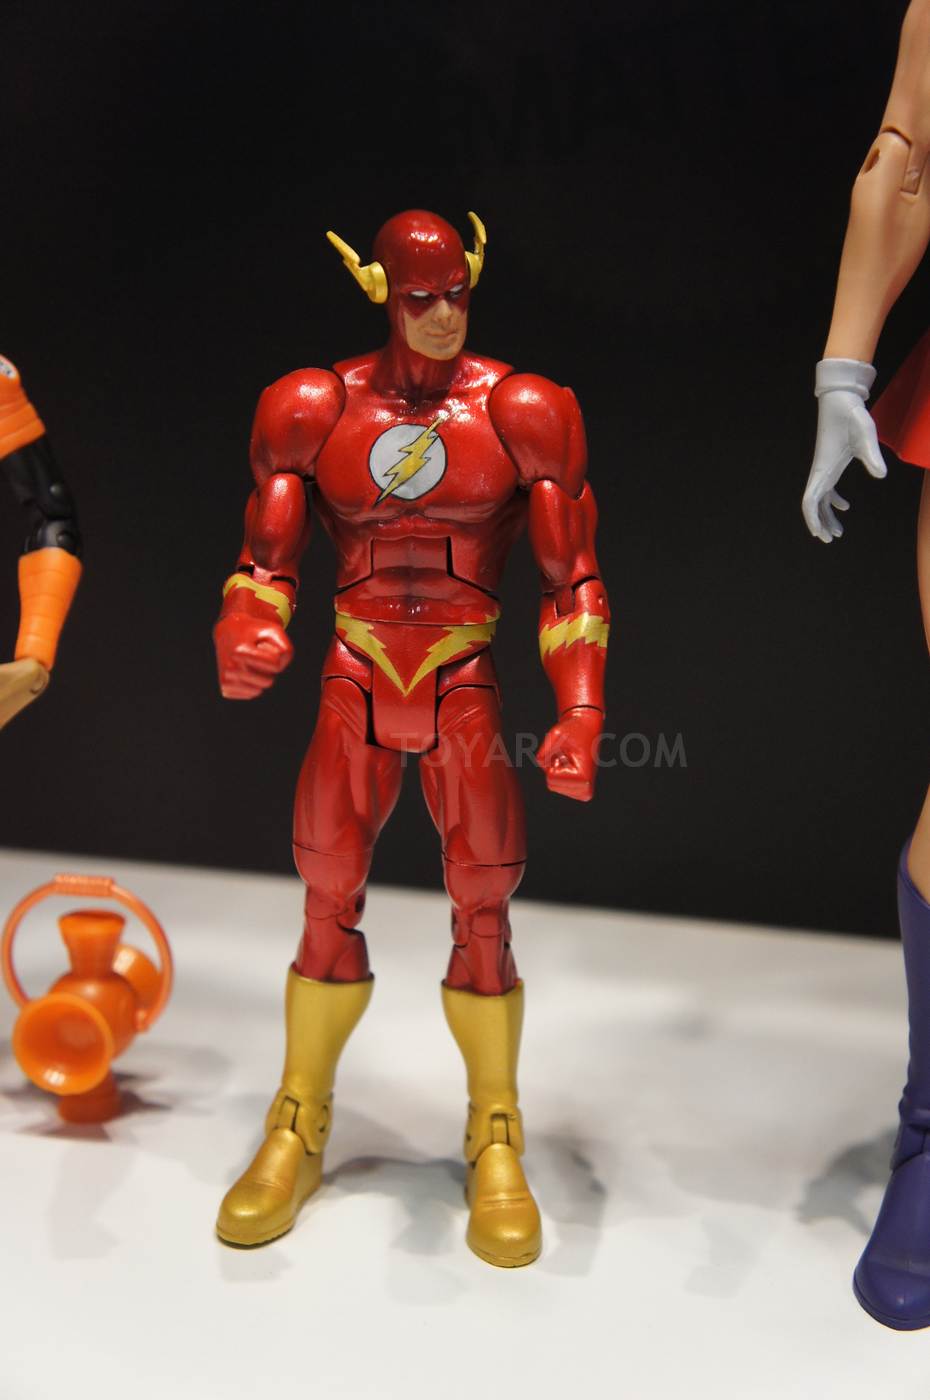 wally west action figure